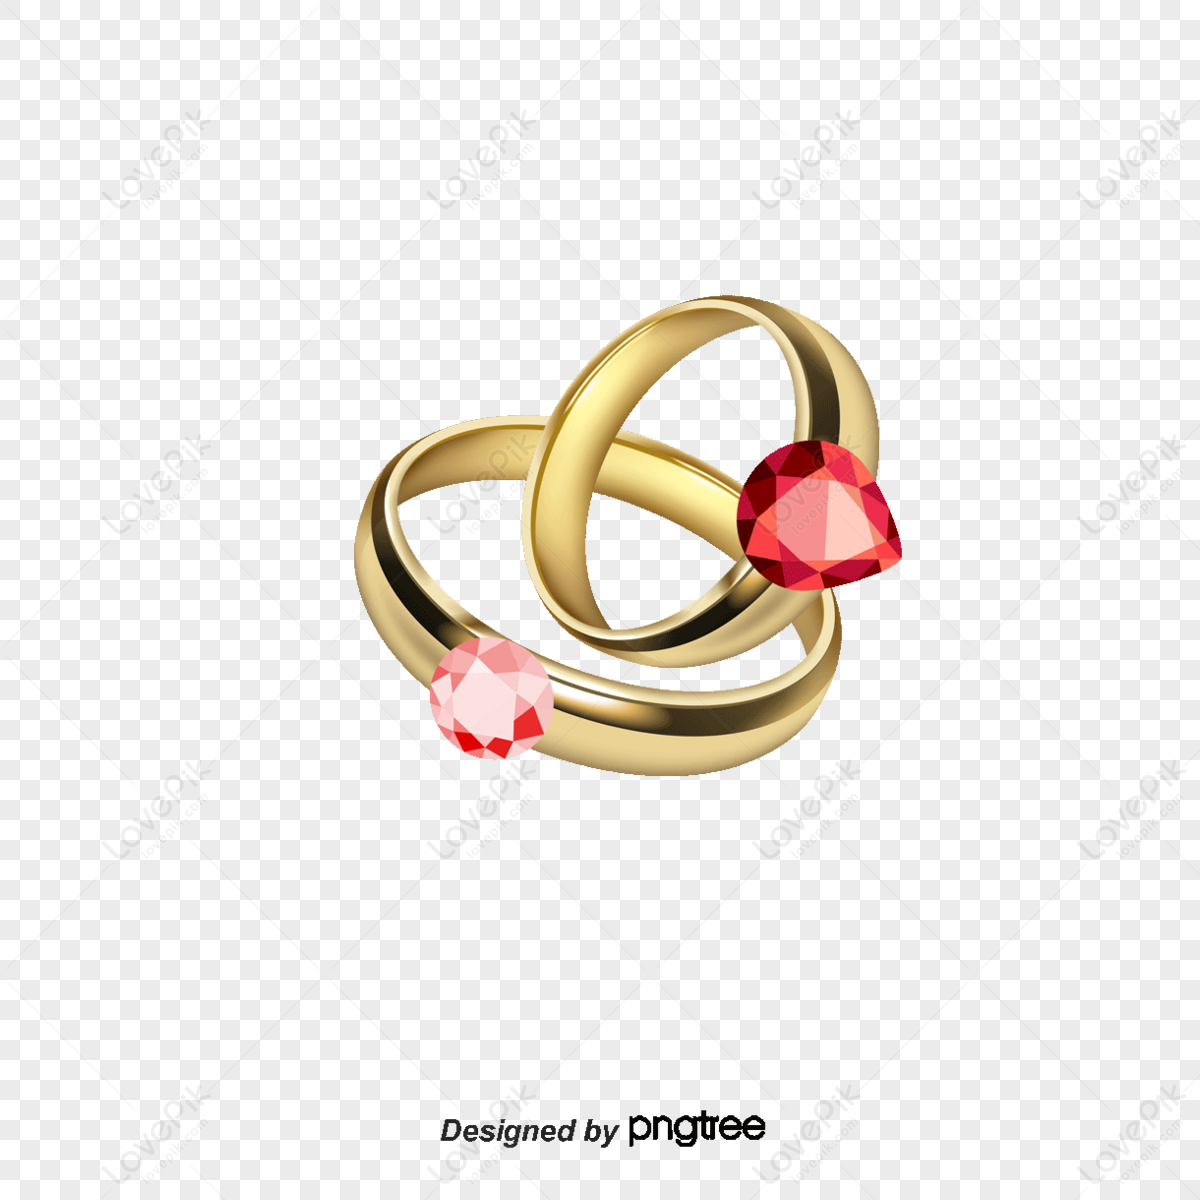 Ring Ceremony PNGs for Free Download